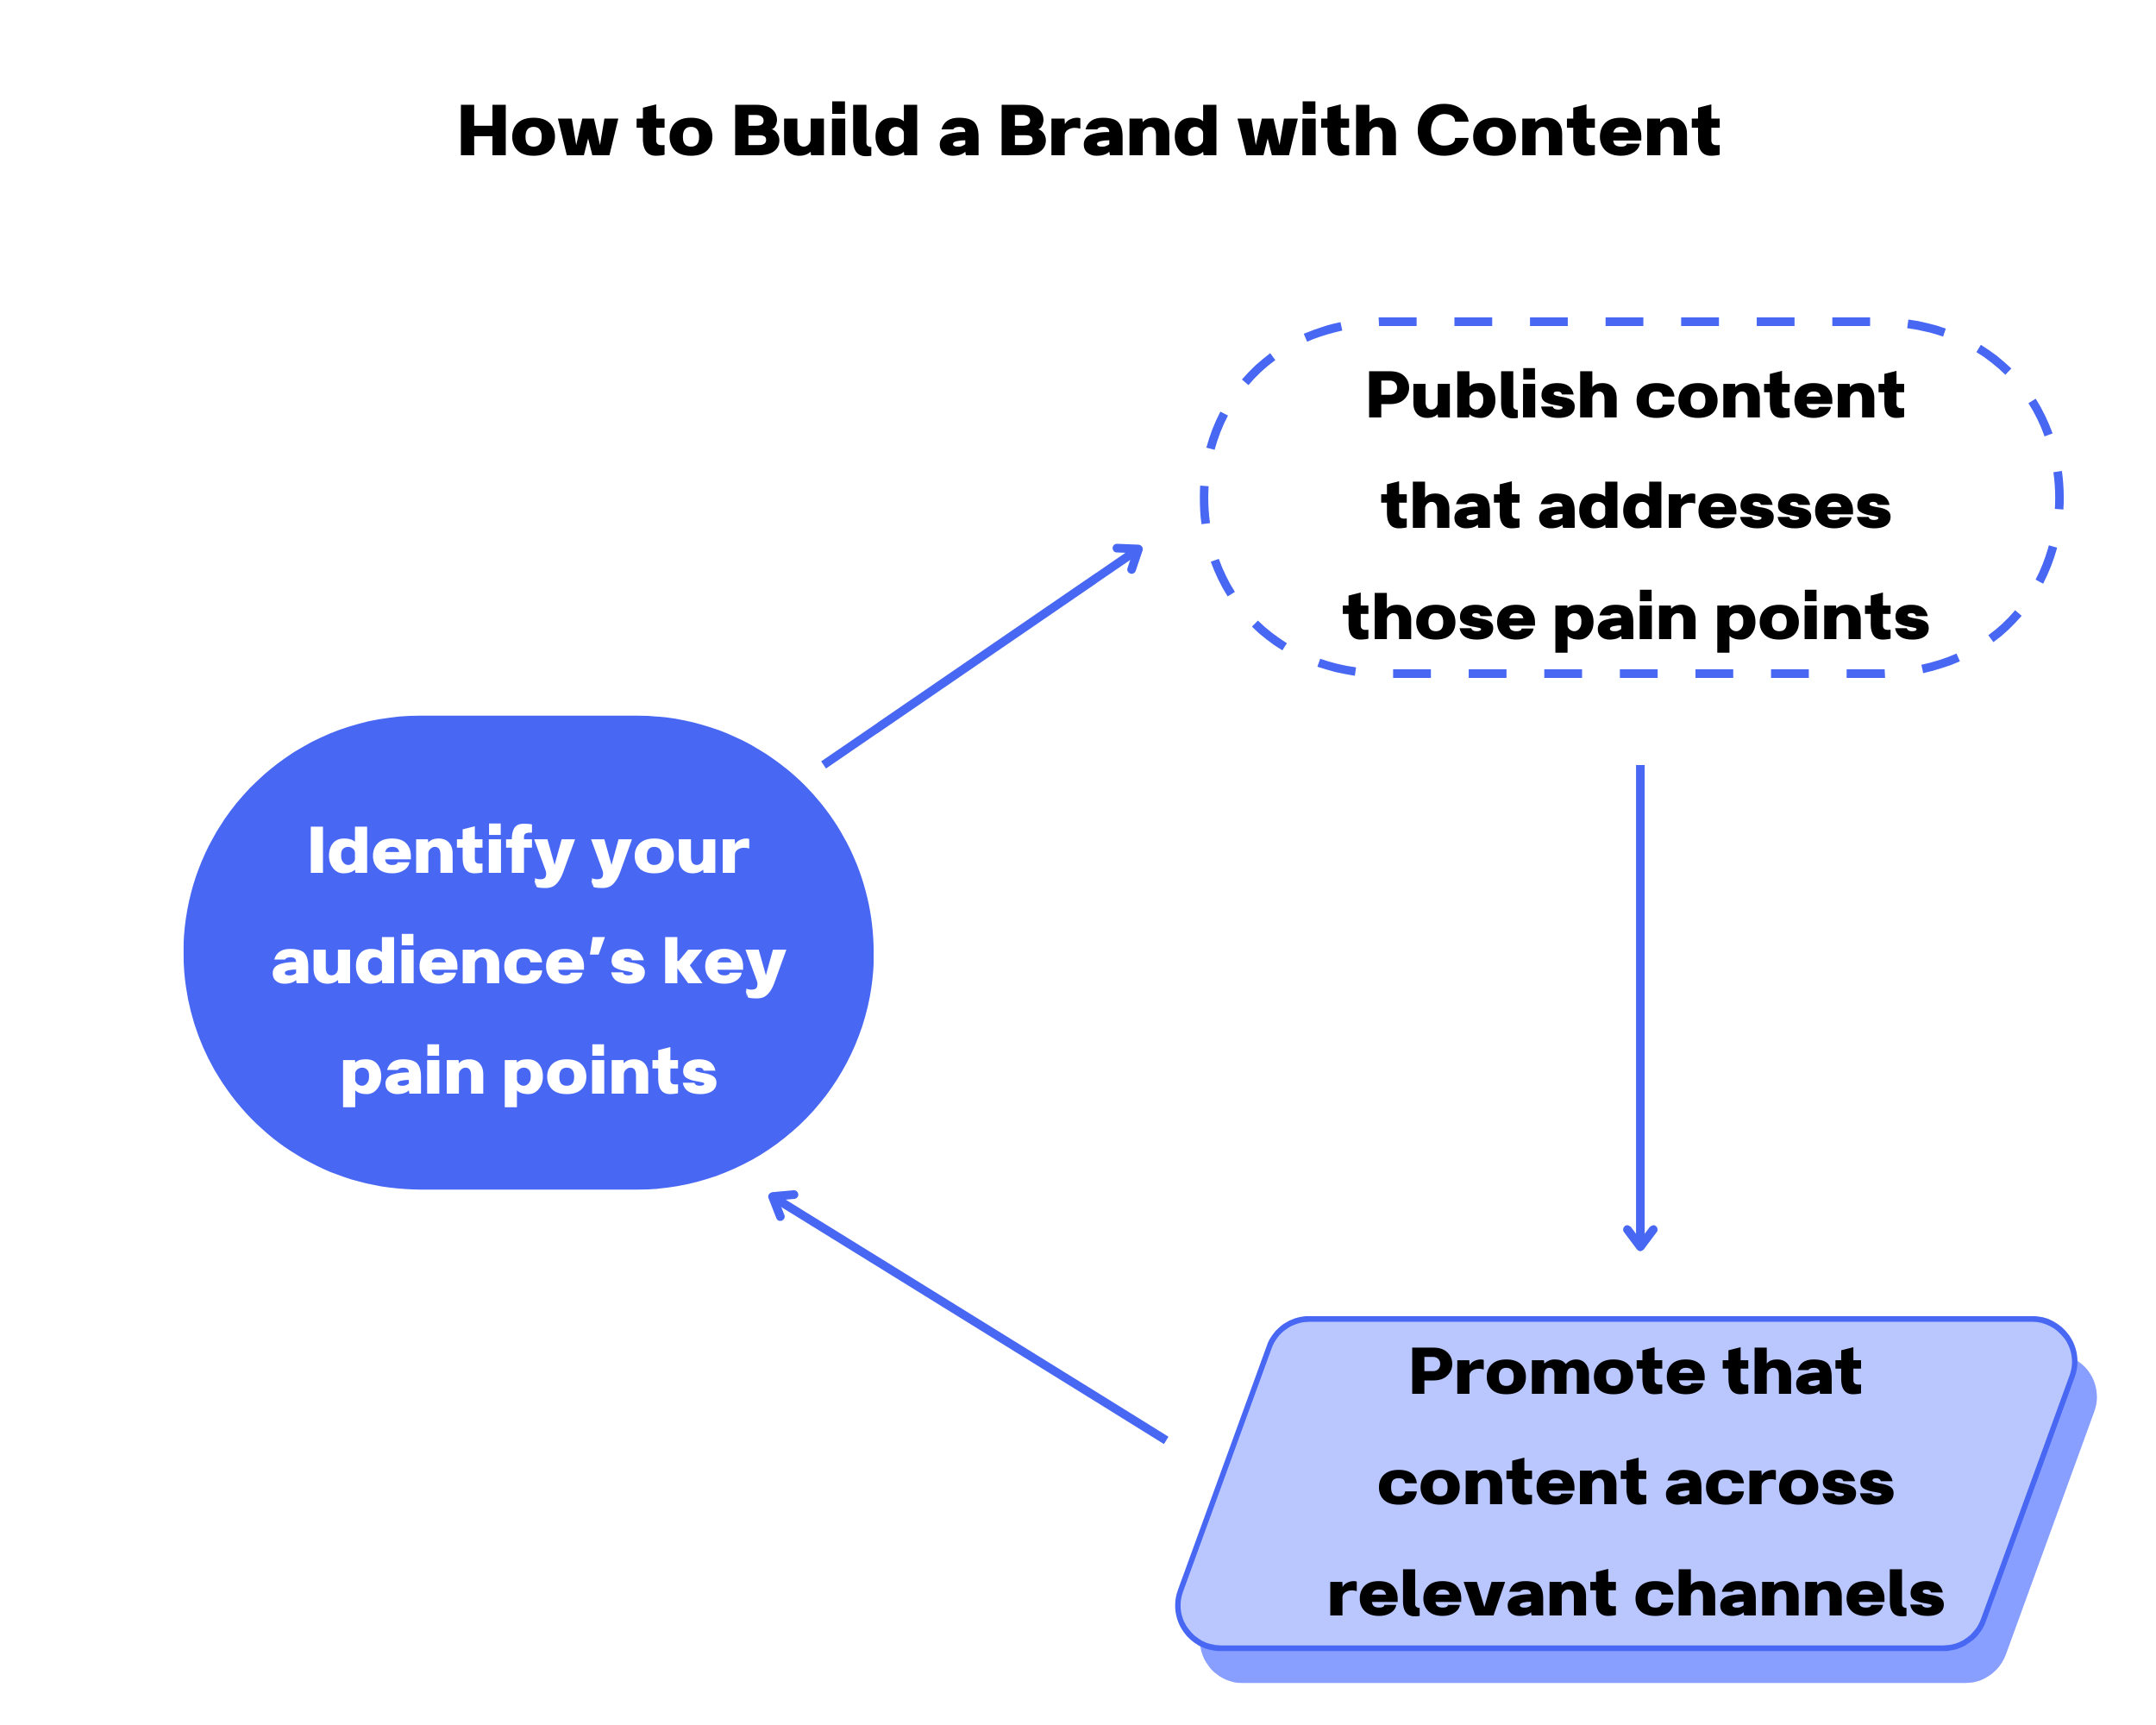 Diagram titled "How to Build a Brand with Content" that illustrates the process described above